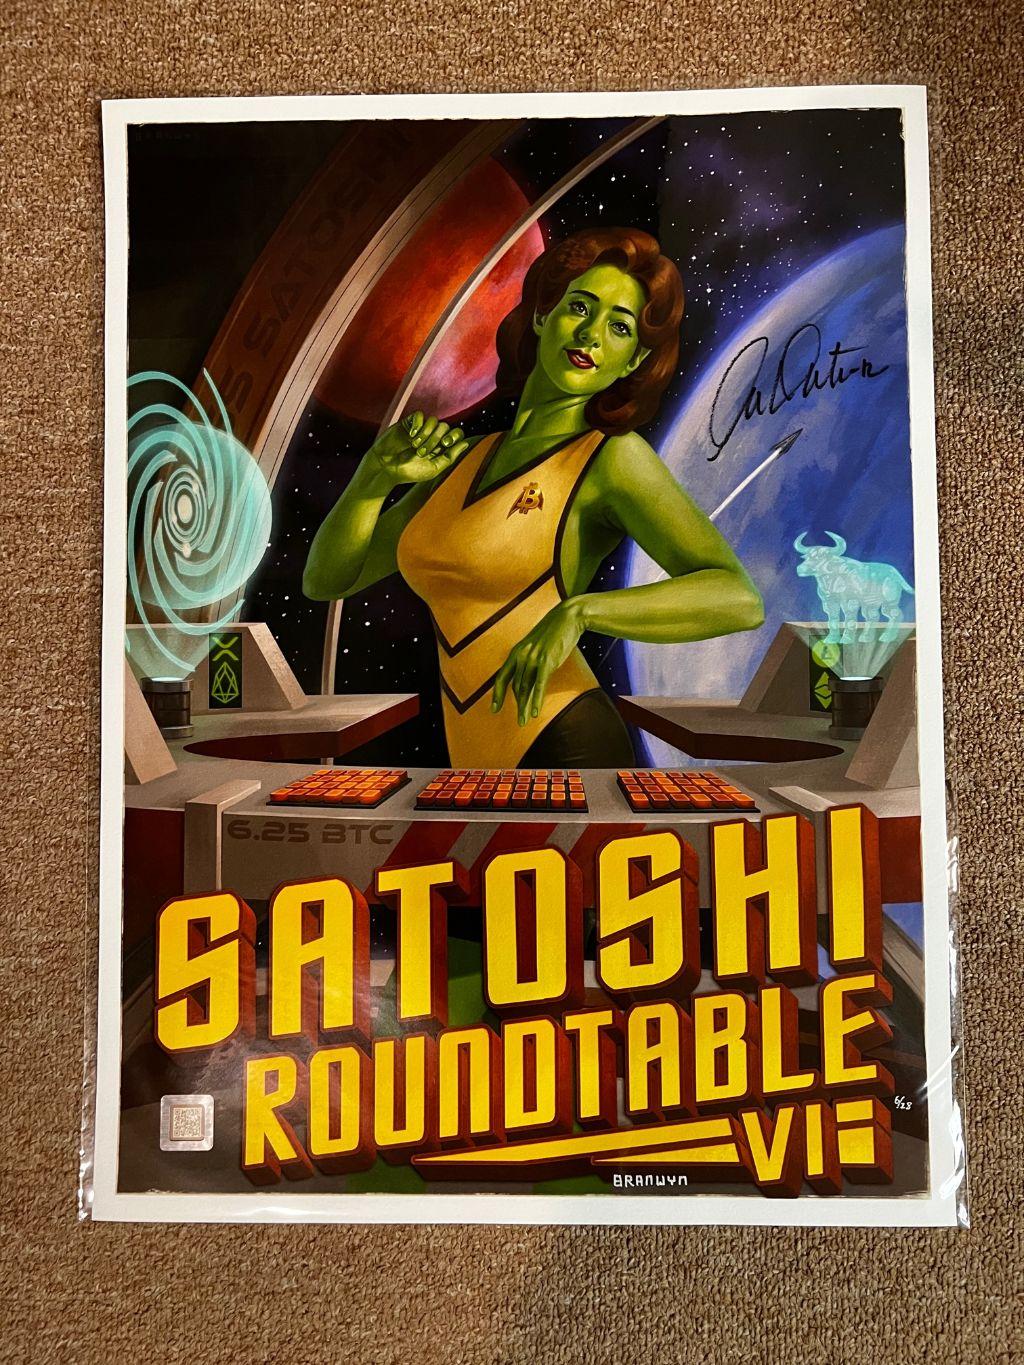 Satoshi Roundtable Poster - Signed by Mr. Shatner